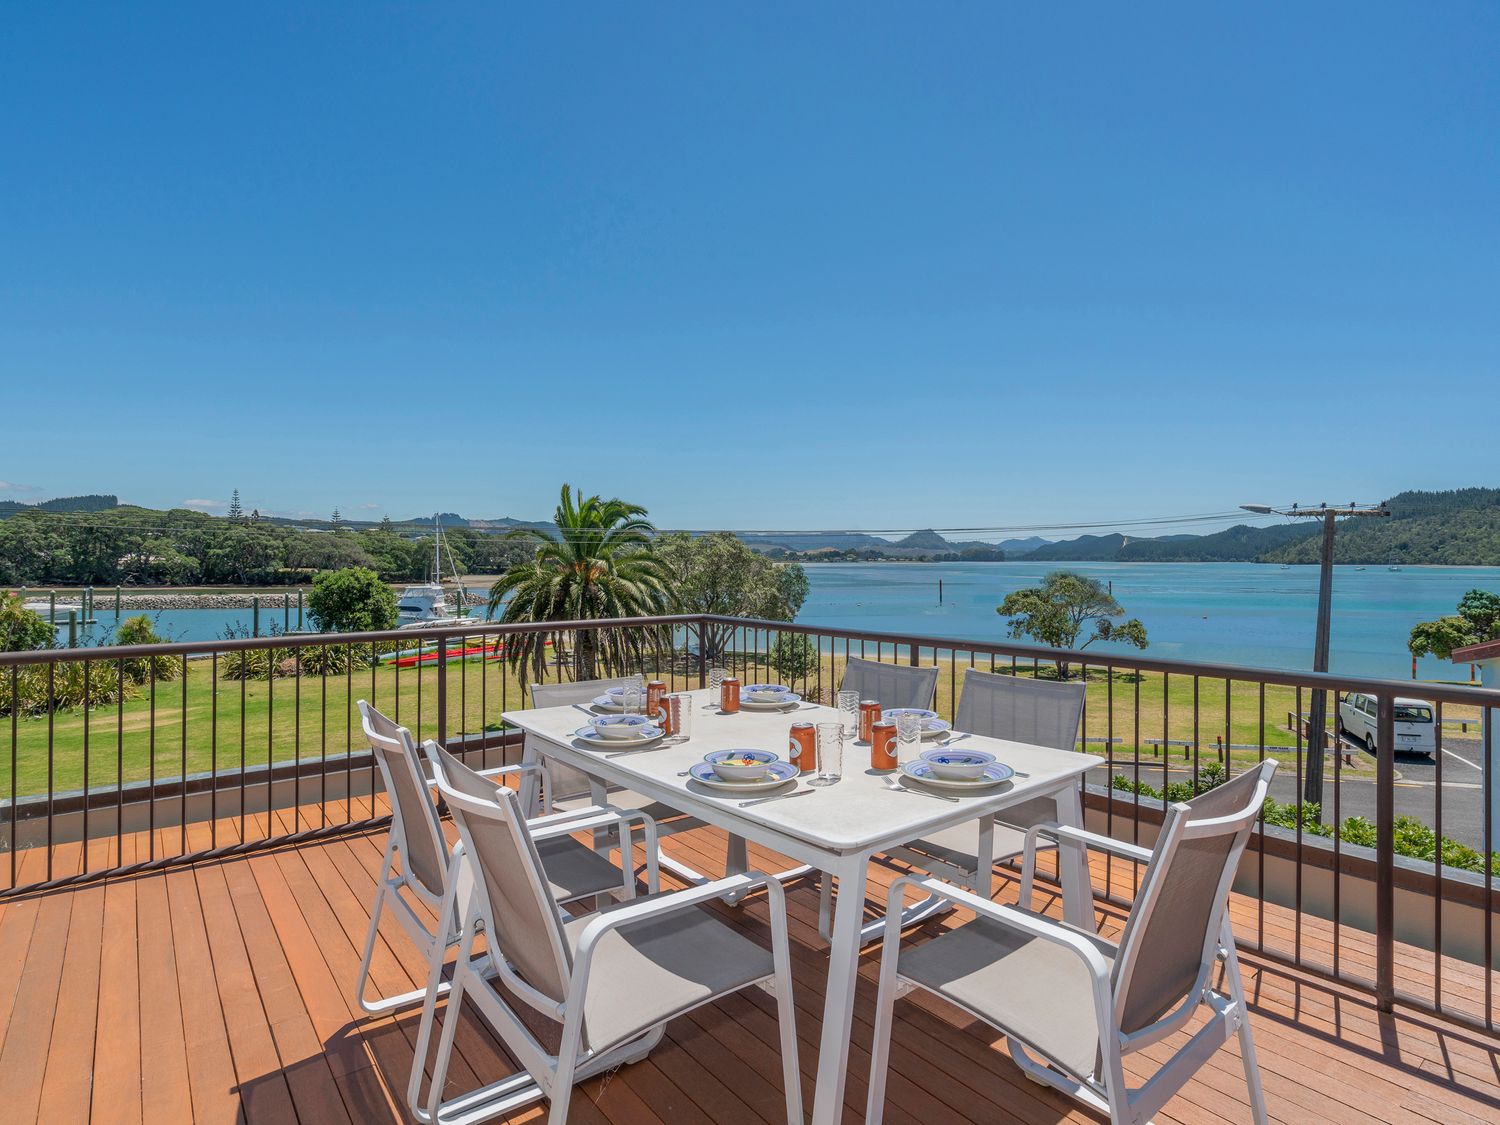 Harbourside Haven - Whangamata Holiday Home -  - 1065200 - photo 1